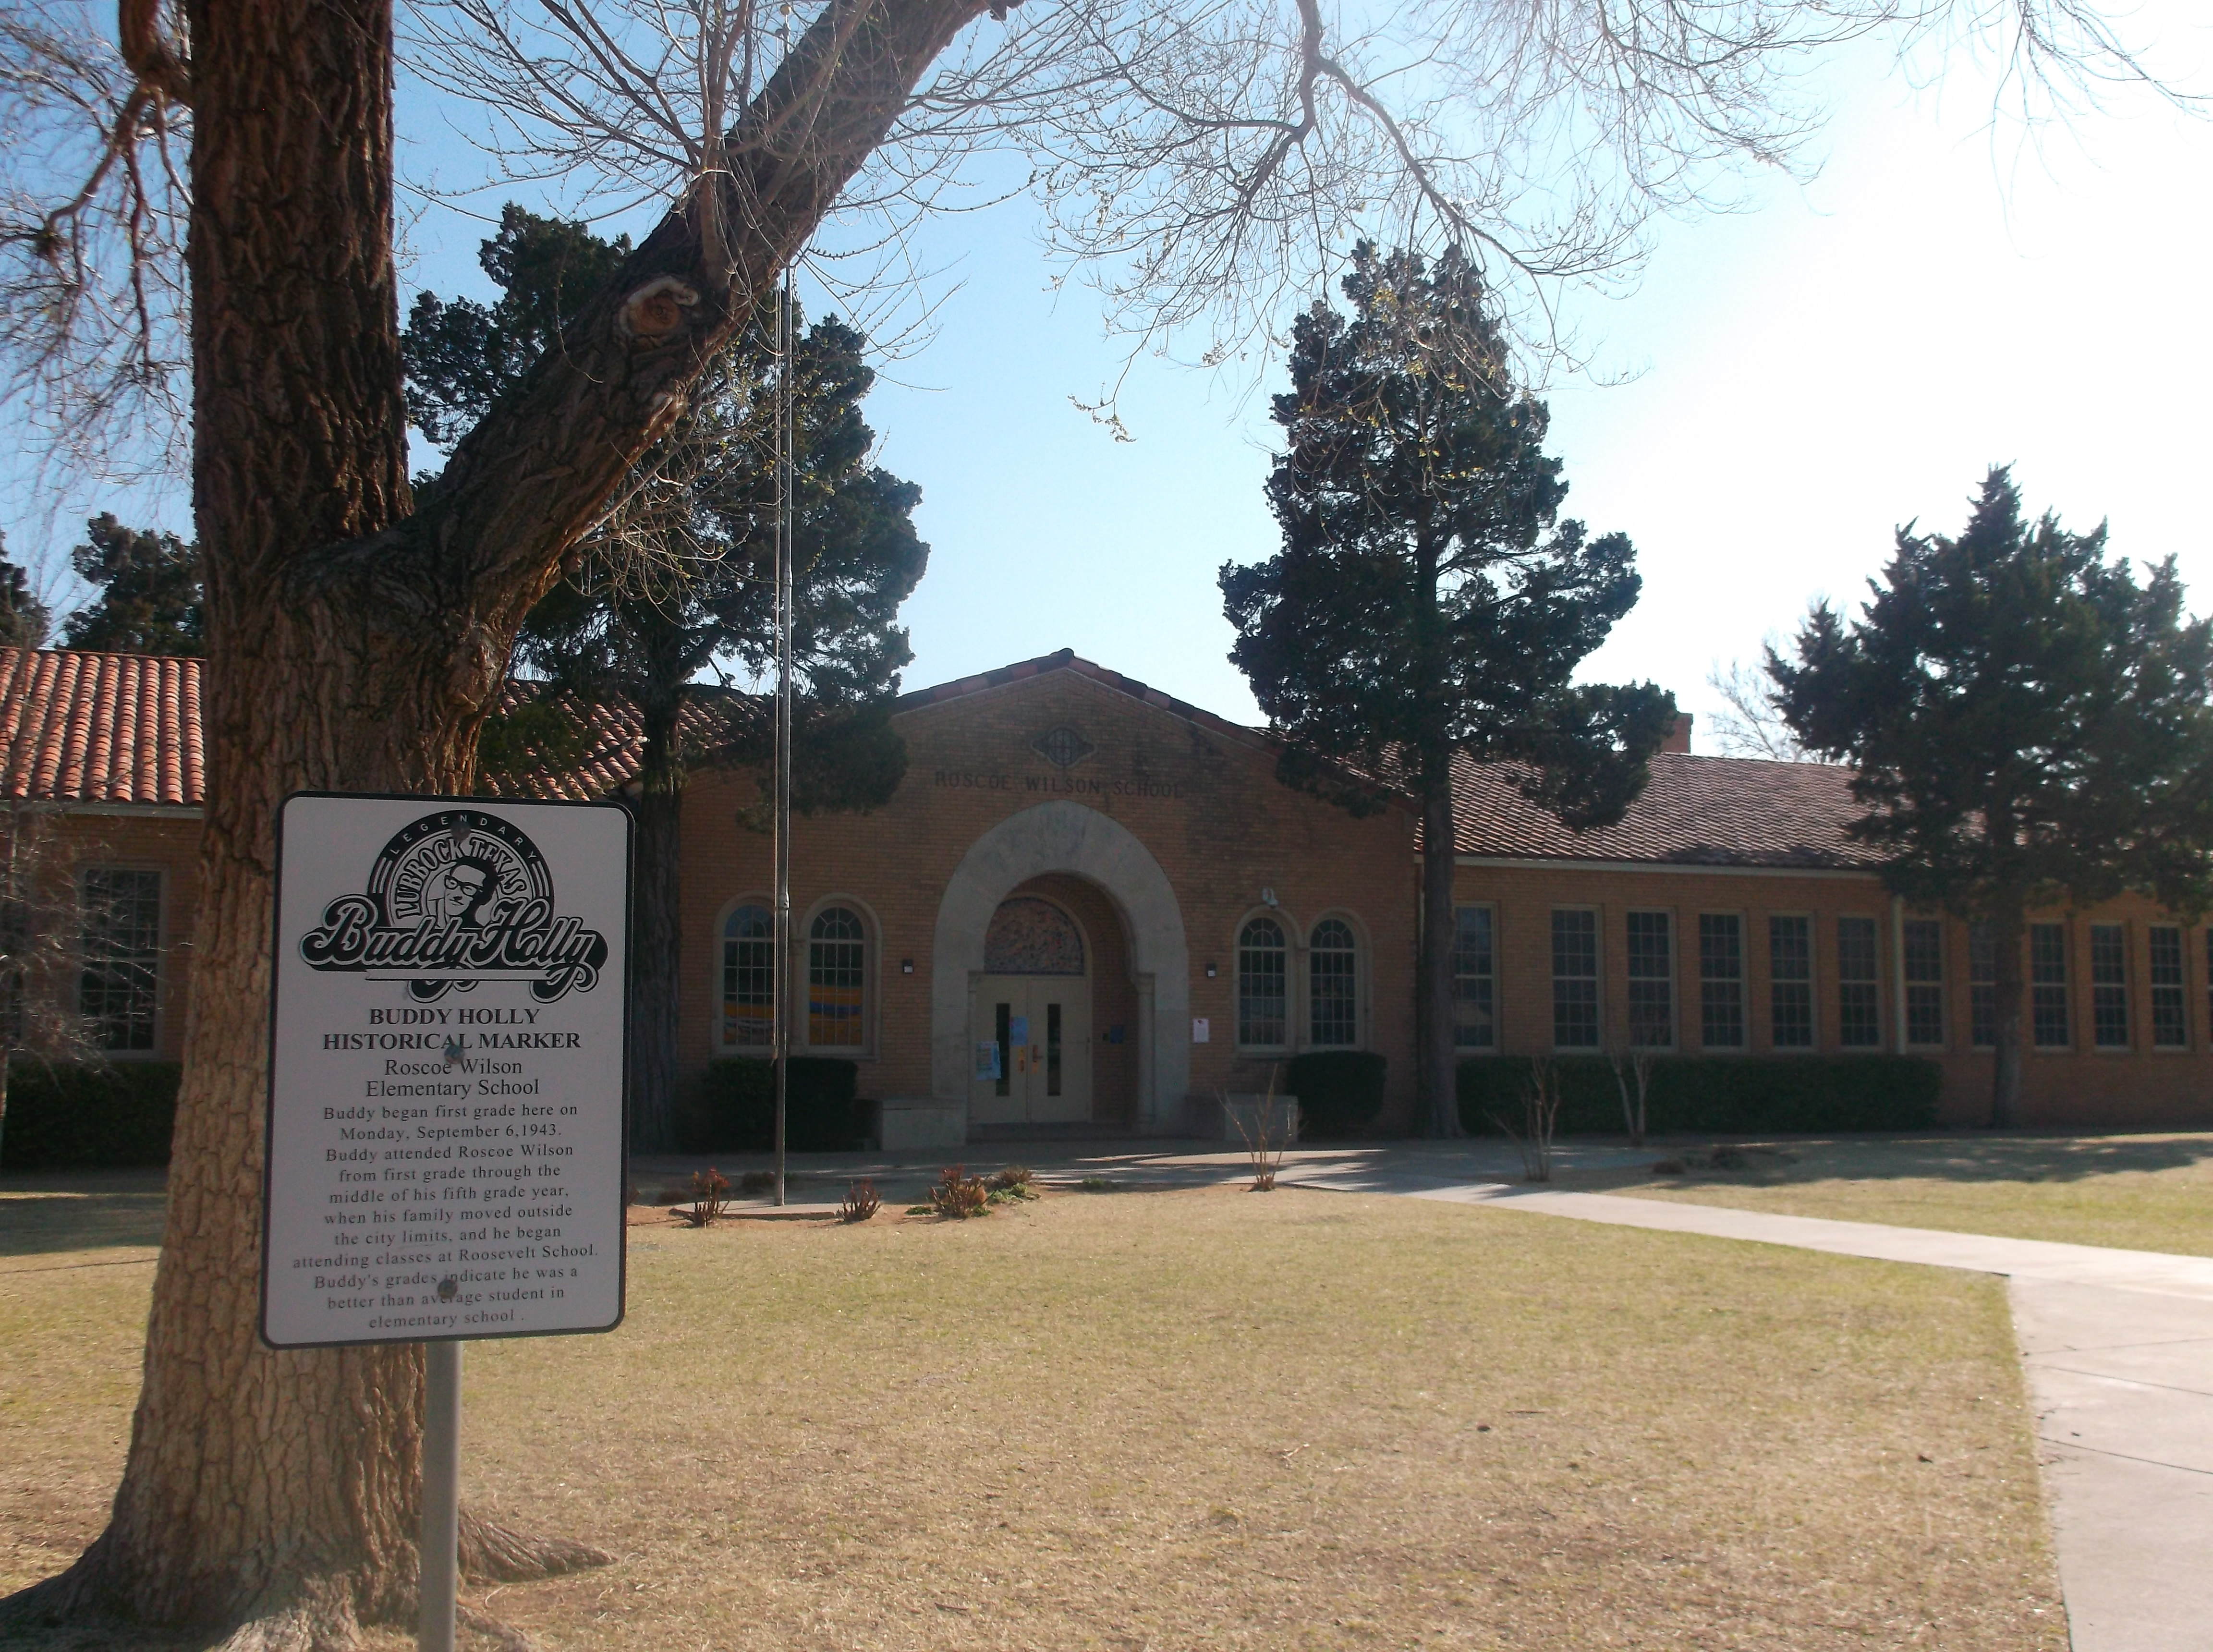 Roscoe Wilson Elementary school building with Buddy Holly historical marker